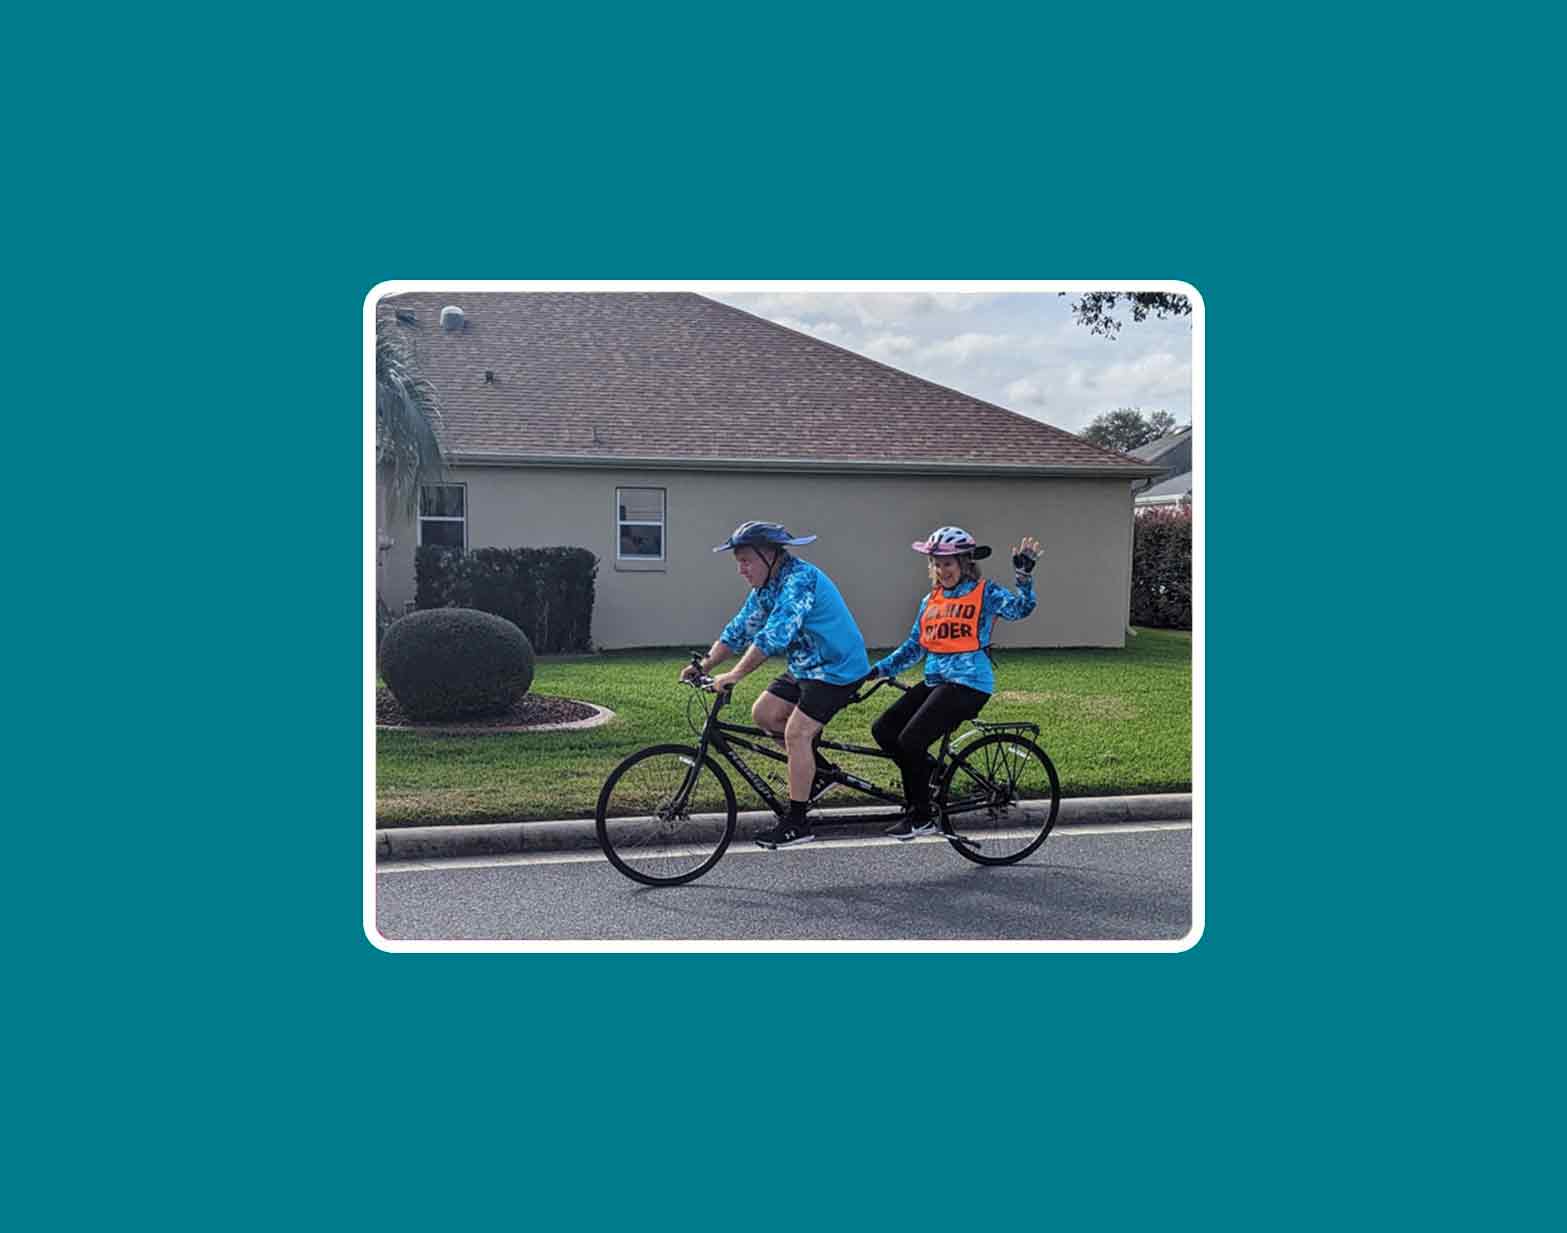 Carol Kitchen and her husband riding a tandem bicycle